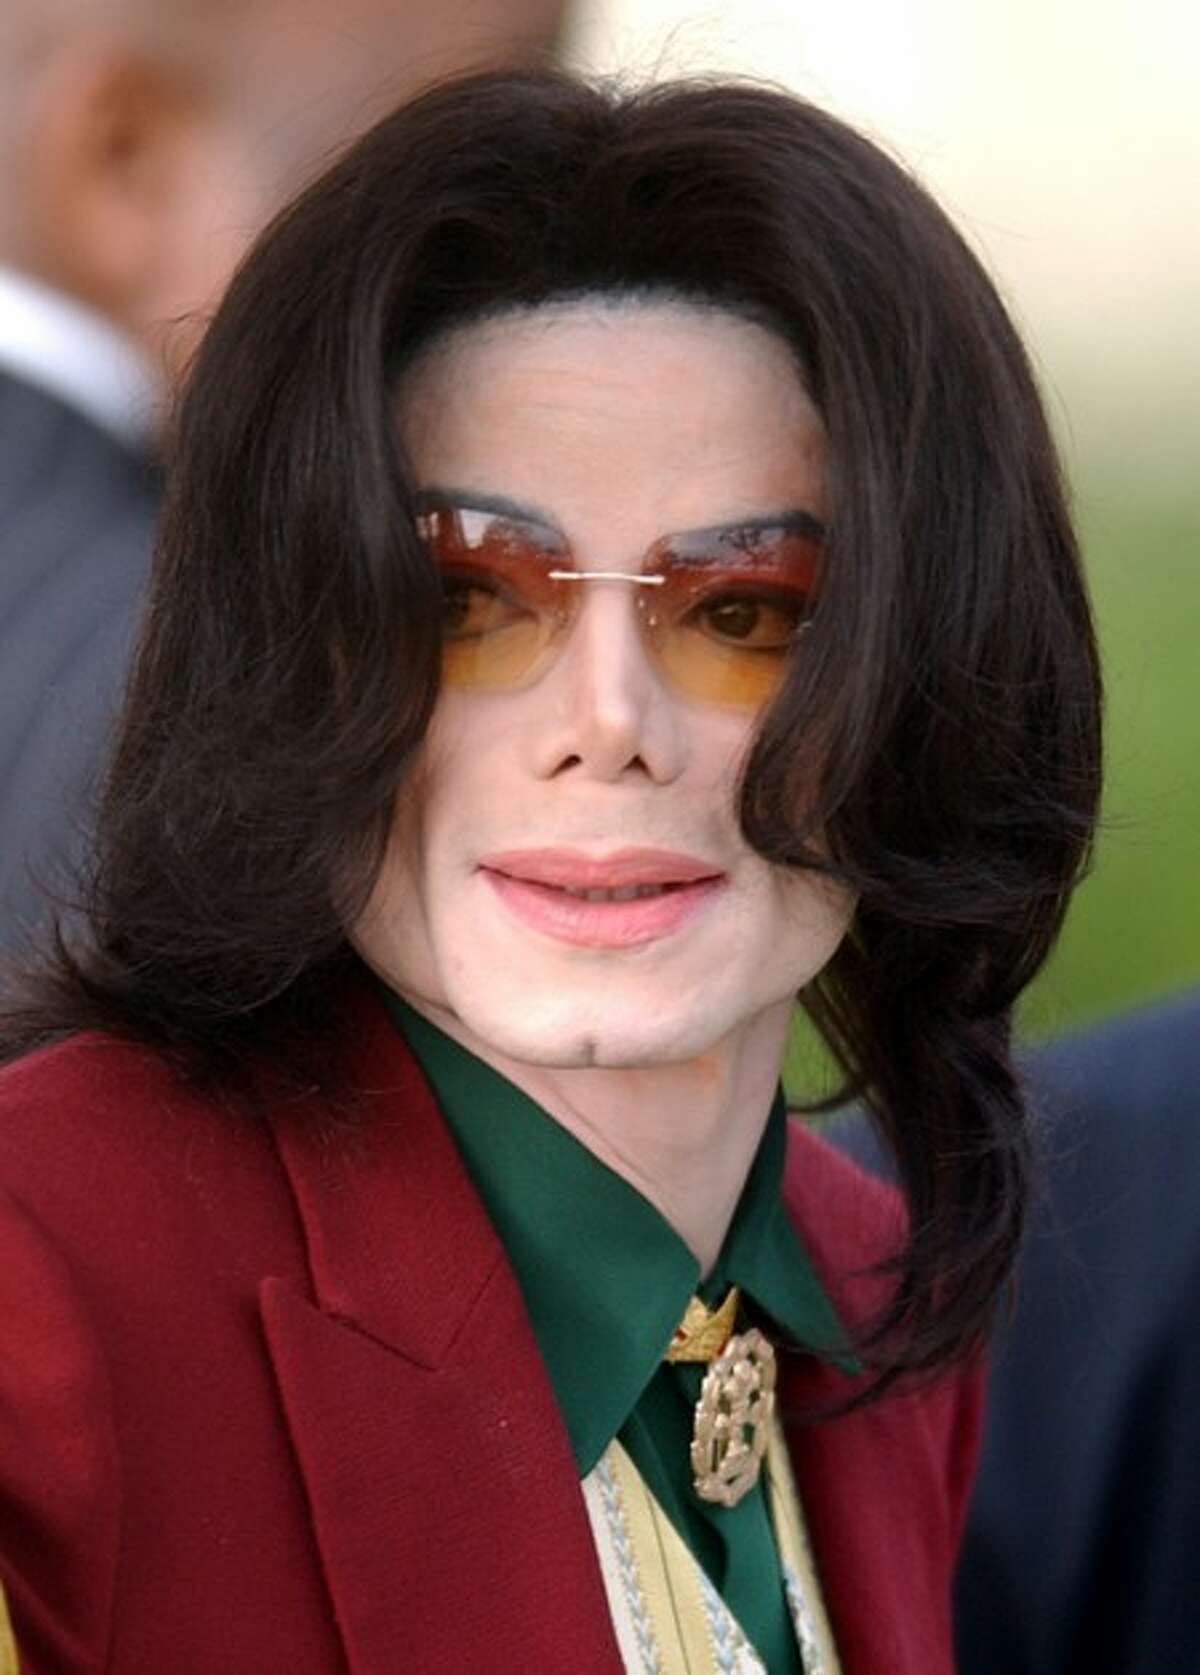 A new Michael Jackson song titled